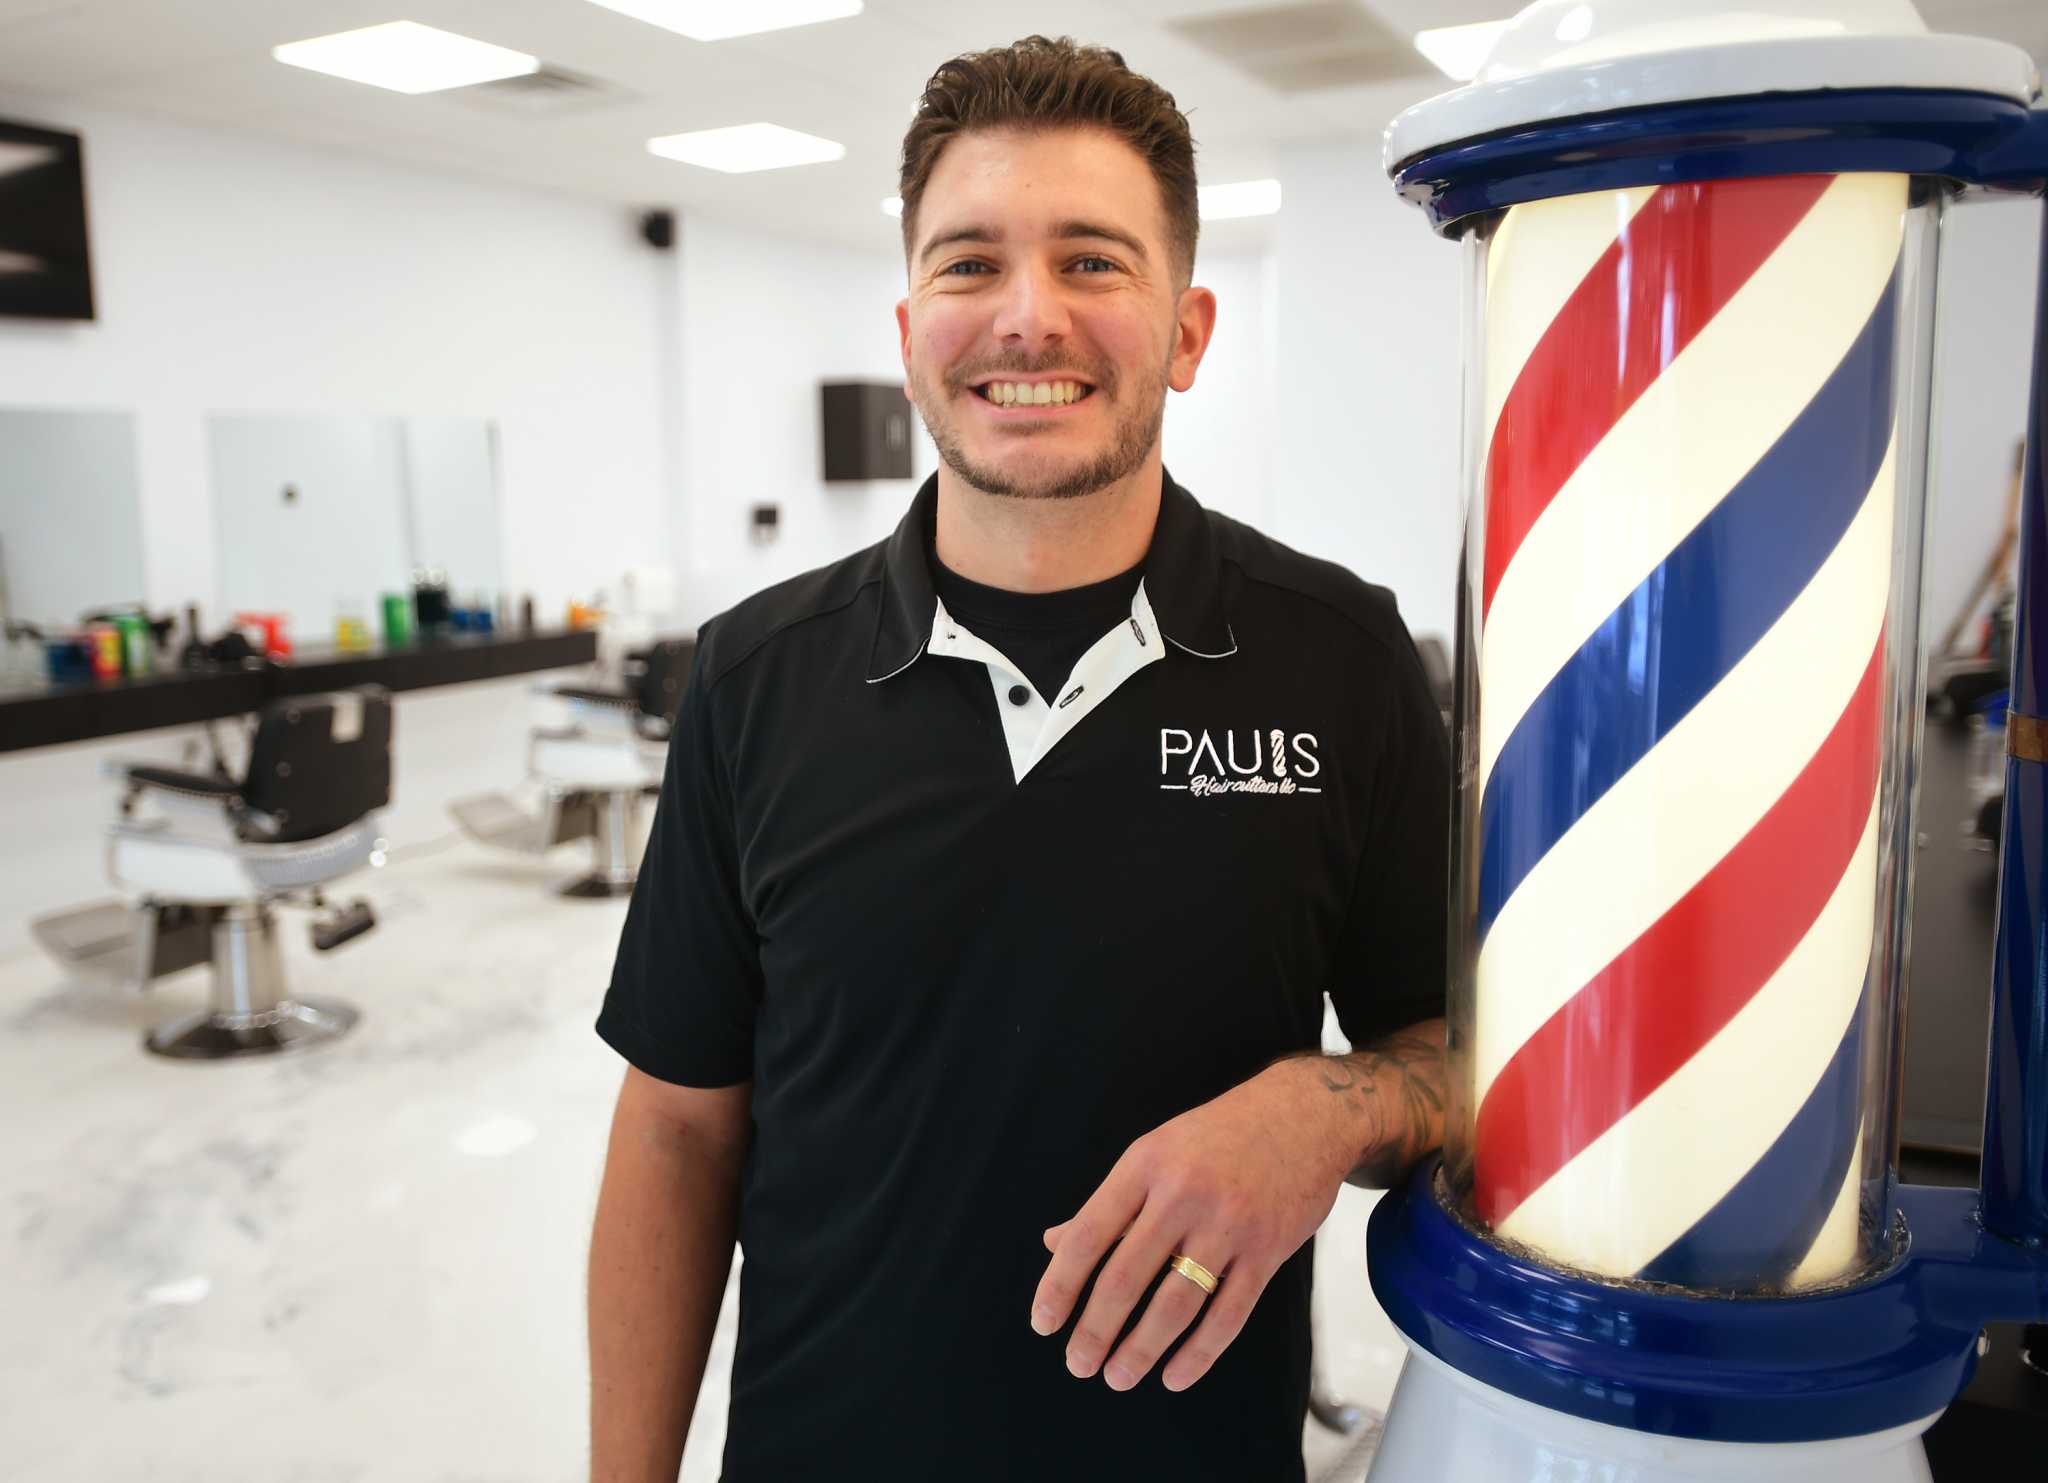 Local sixth-generation barber keeps things old school